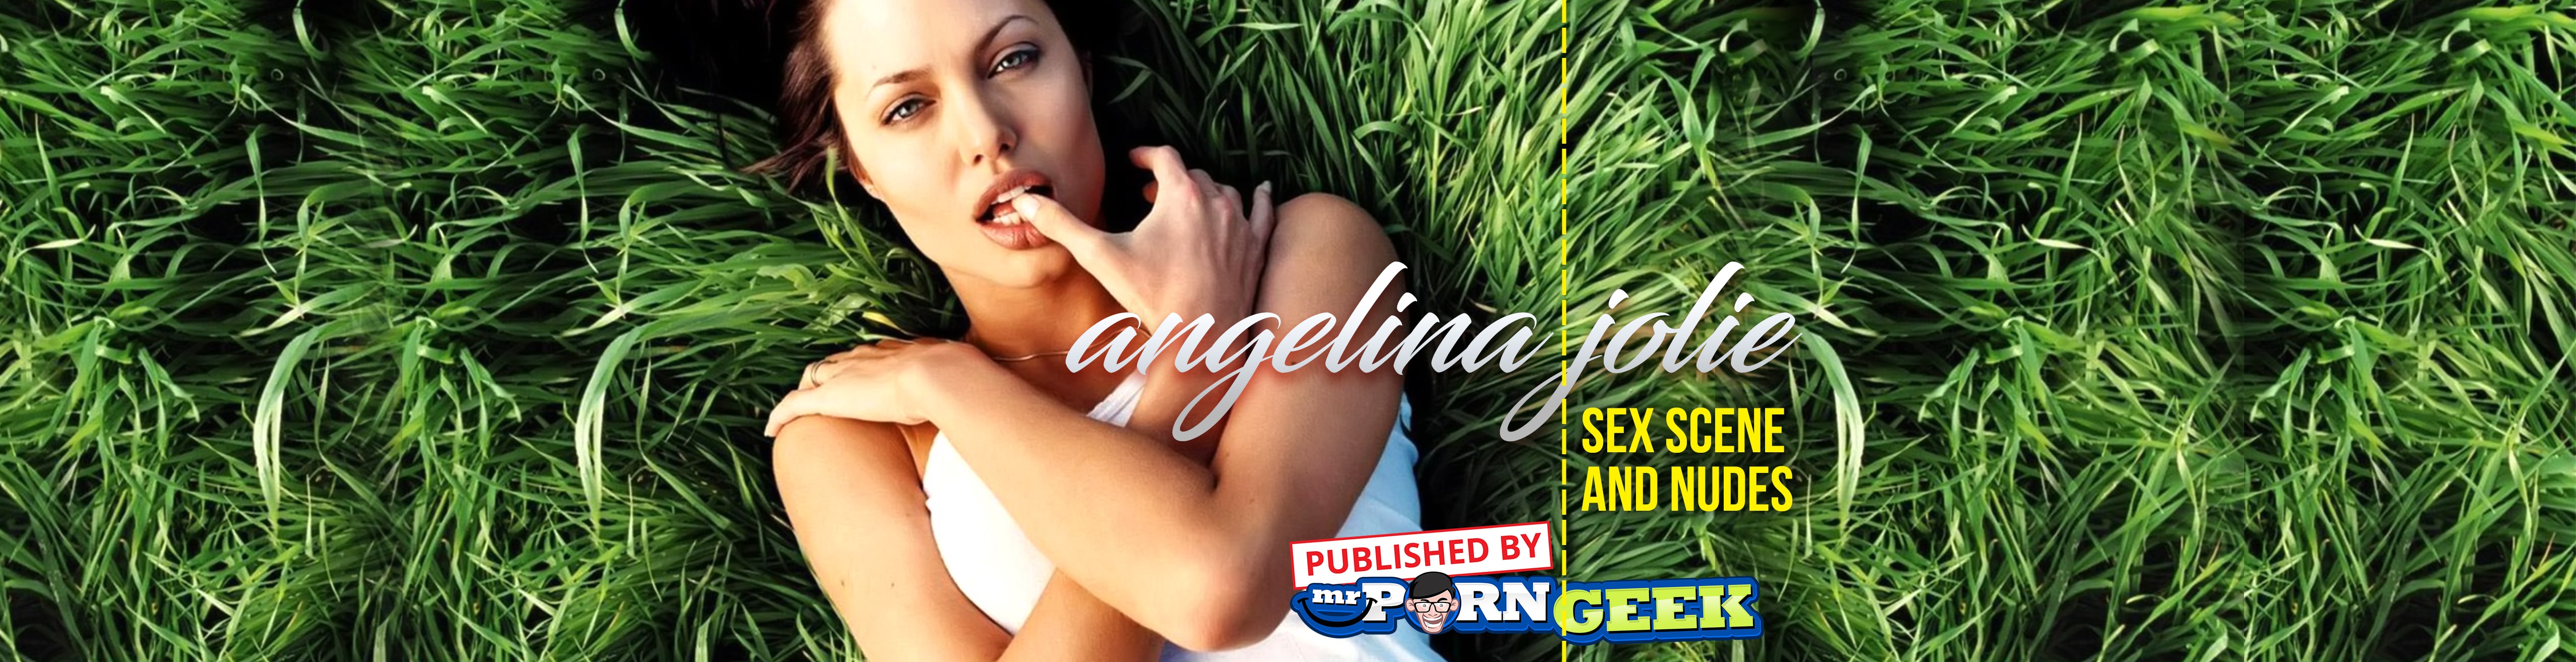 Angelina Jolie Having Sex - Get The Top Angelina Jolie Naked Sex Scene And Nudes At Mr. Porn Geek